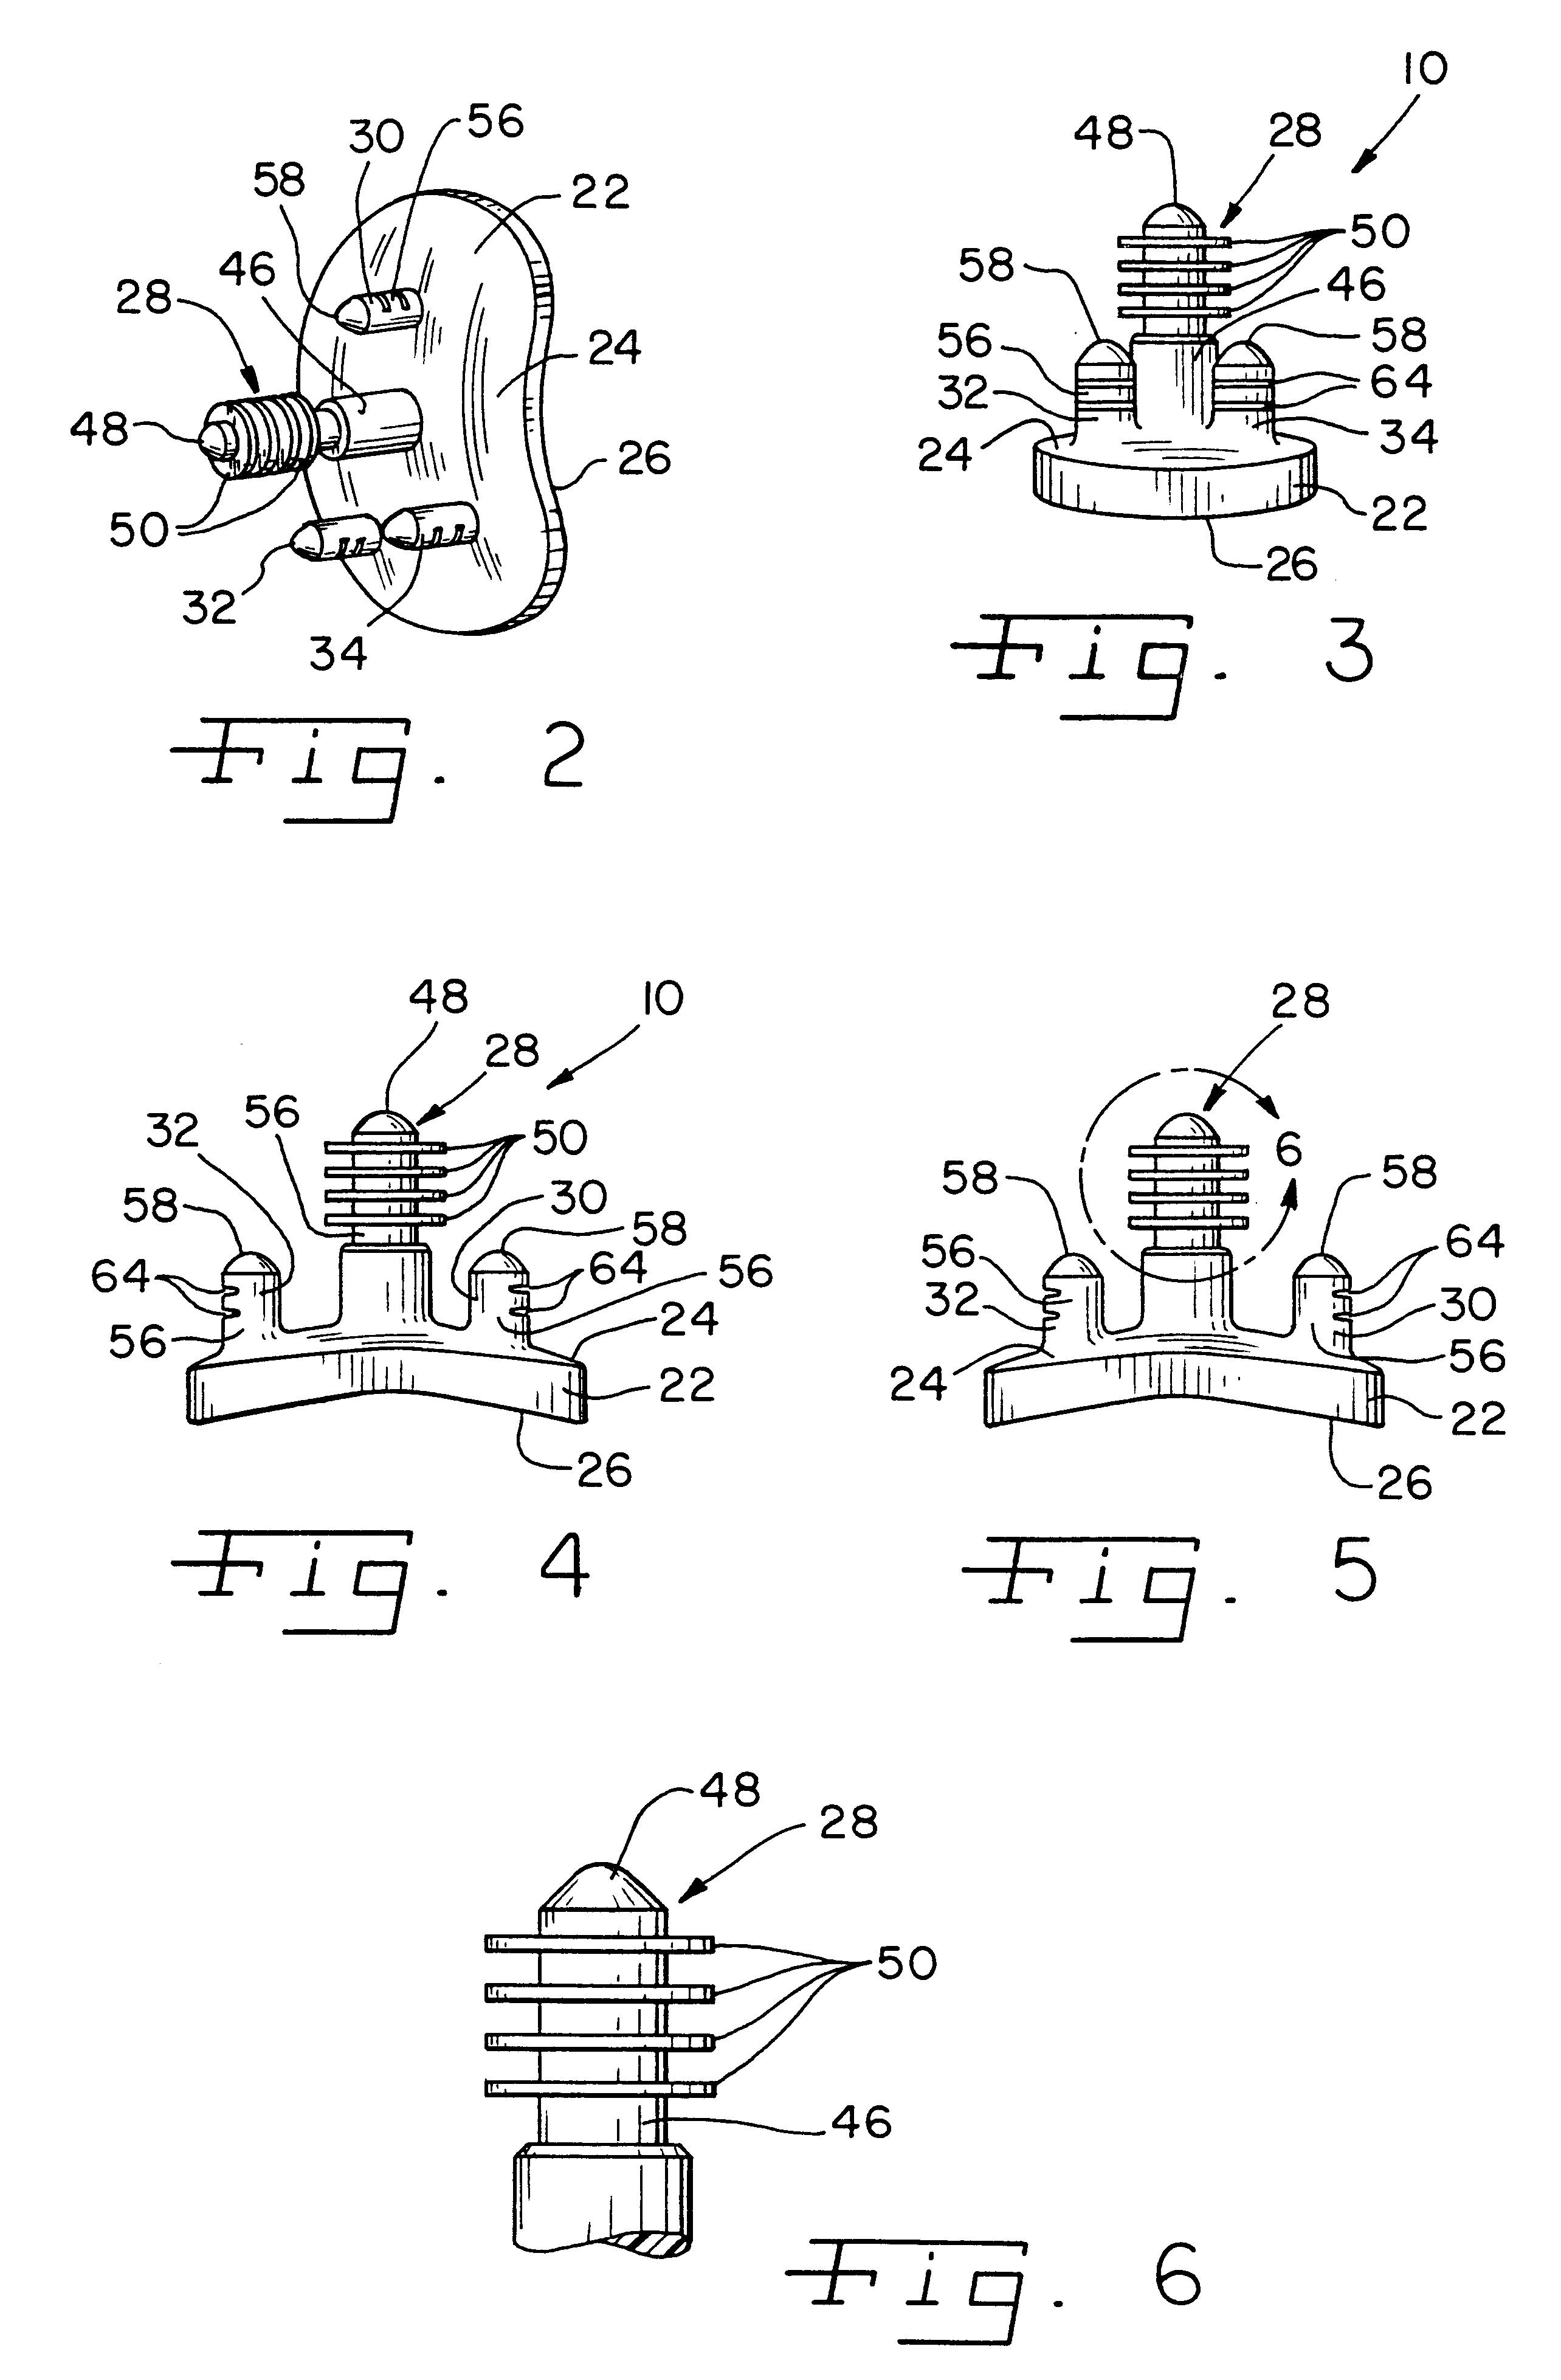 Apparatus and method for securing a cementless glenoid component to a glenoid surface of a scapula